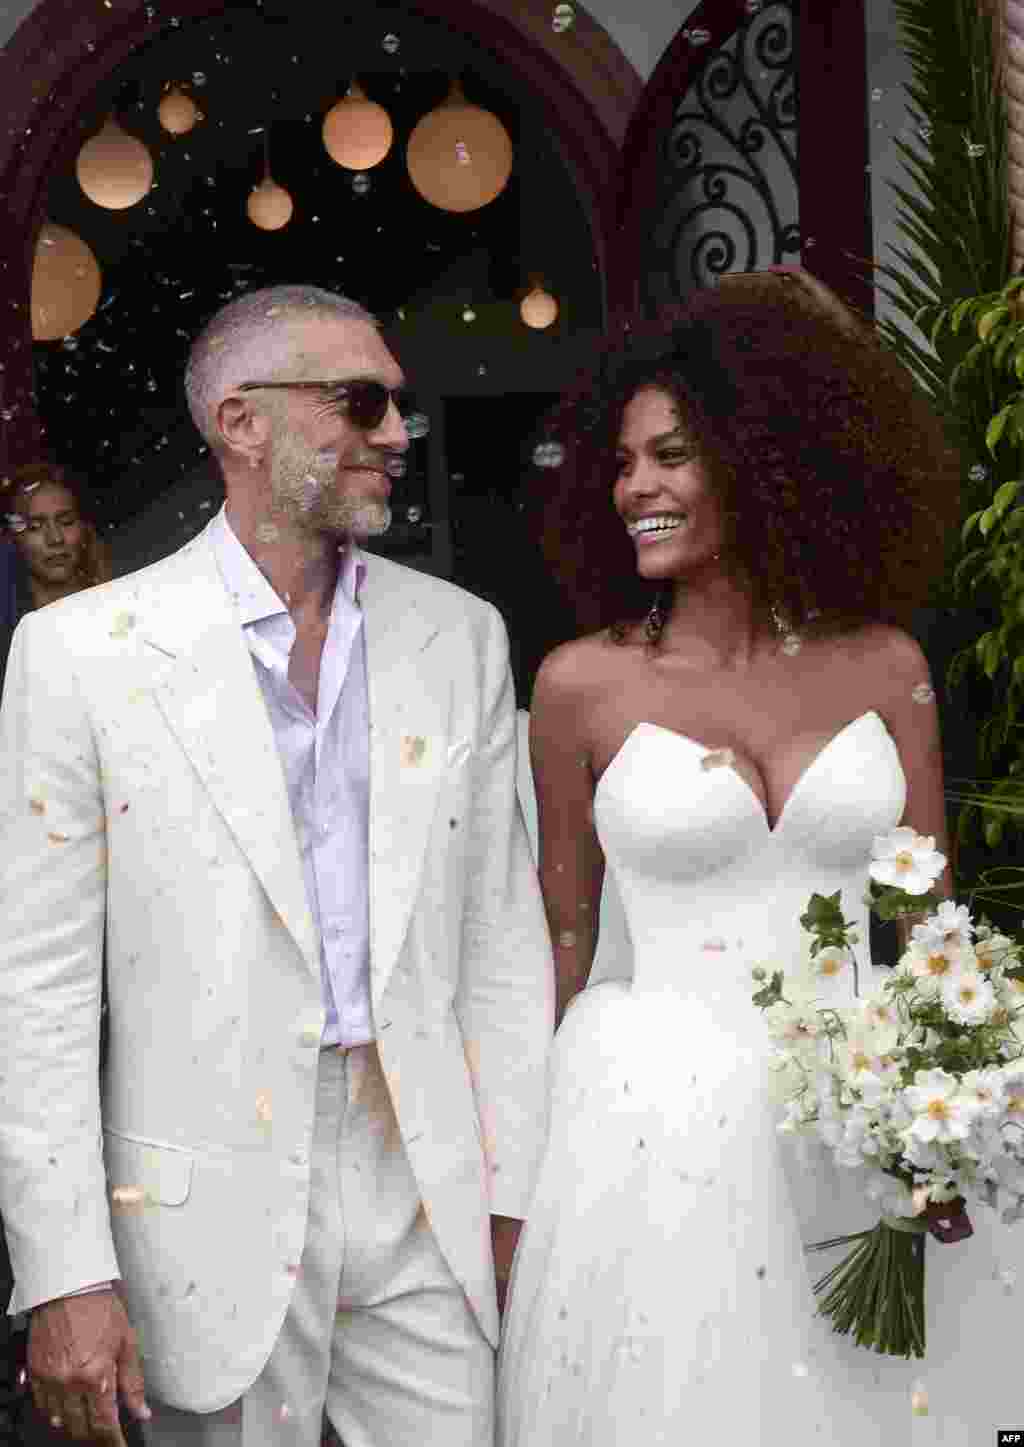 French actor Vincent Cassel (L) and French model Tina Kunakey leave after their wedding ceremony at the city hall of Bidart, southwestern France.